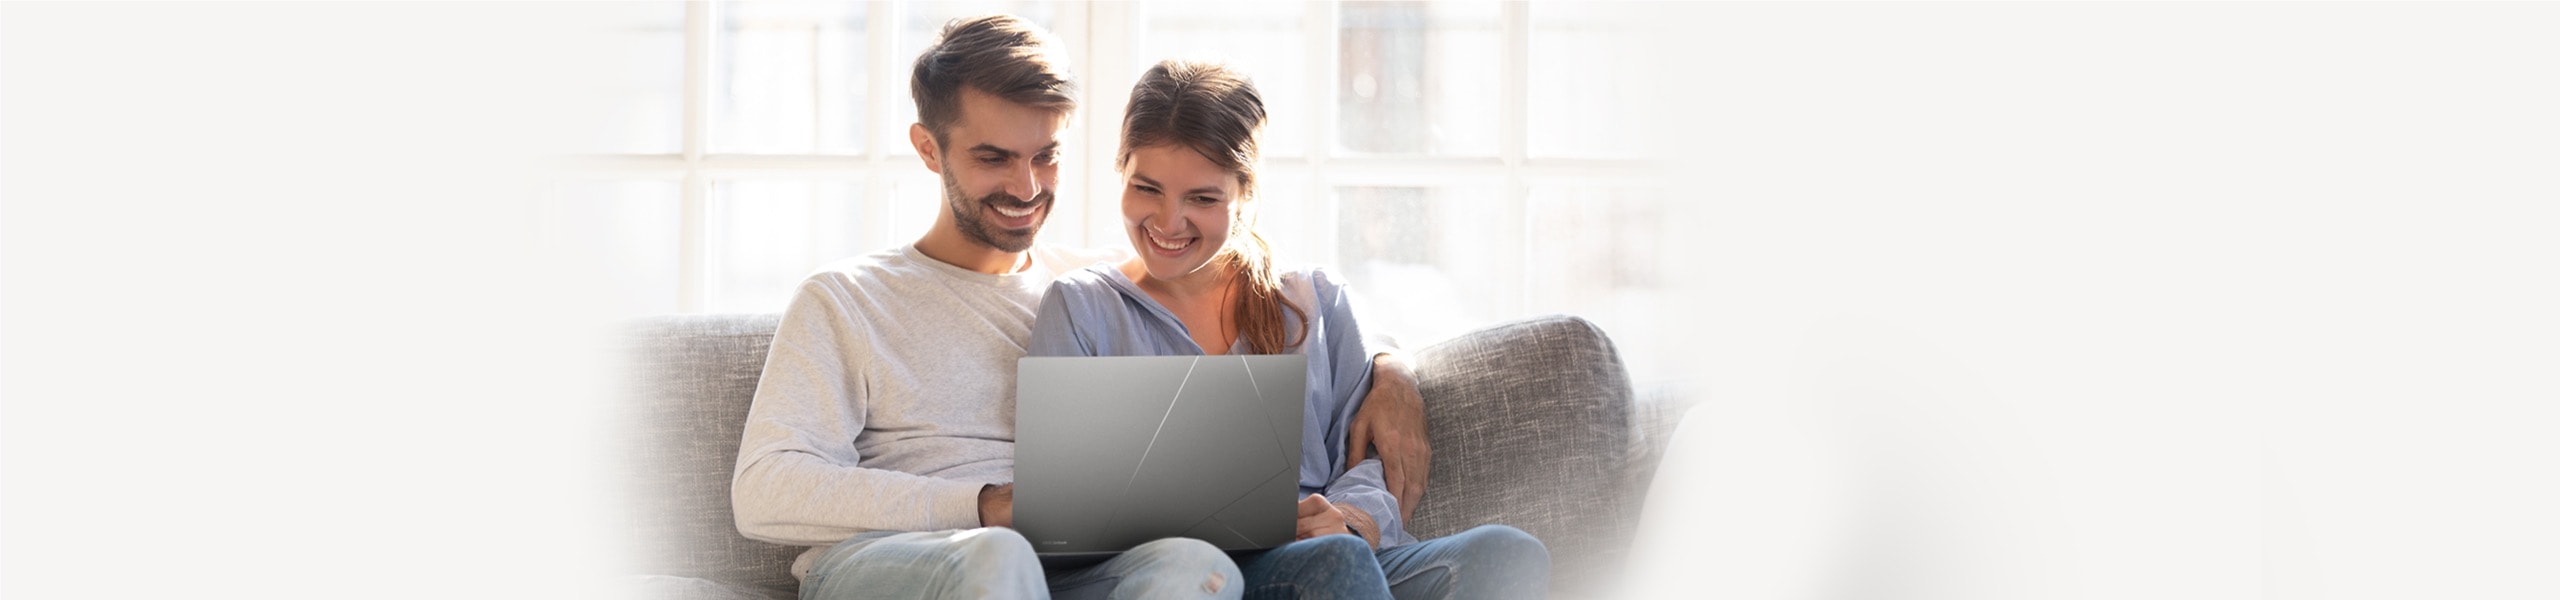 A women & men sitting together and using laptop